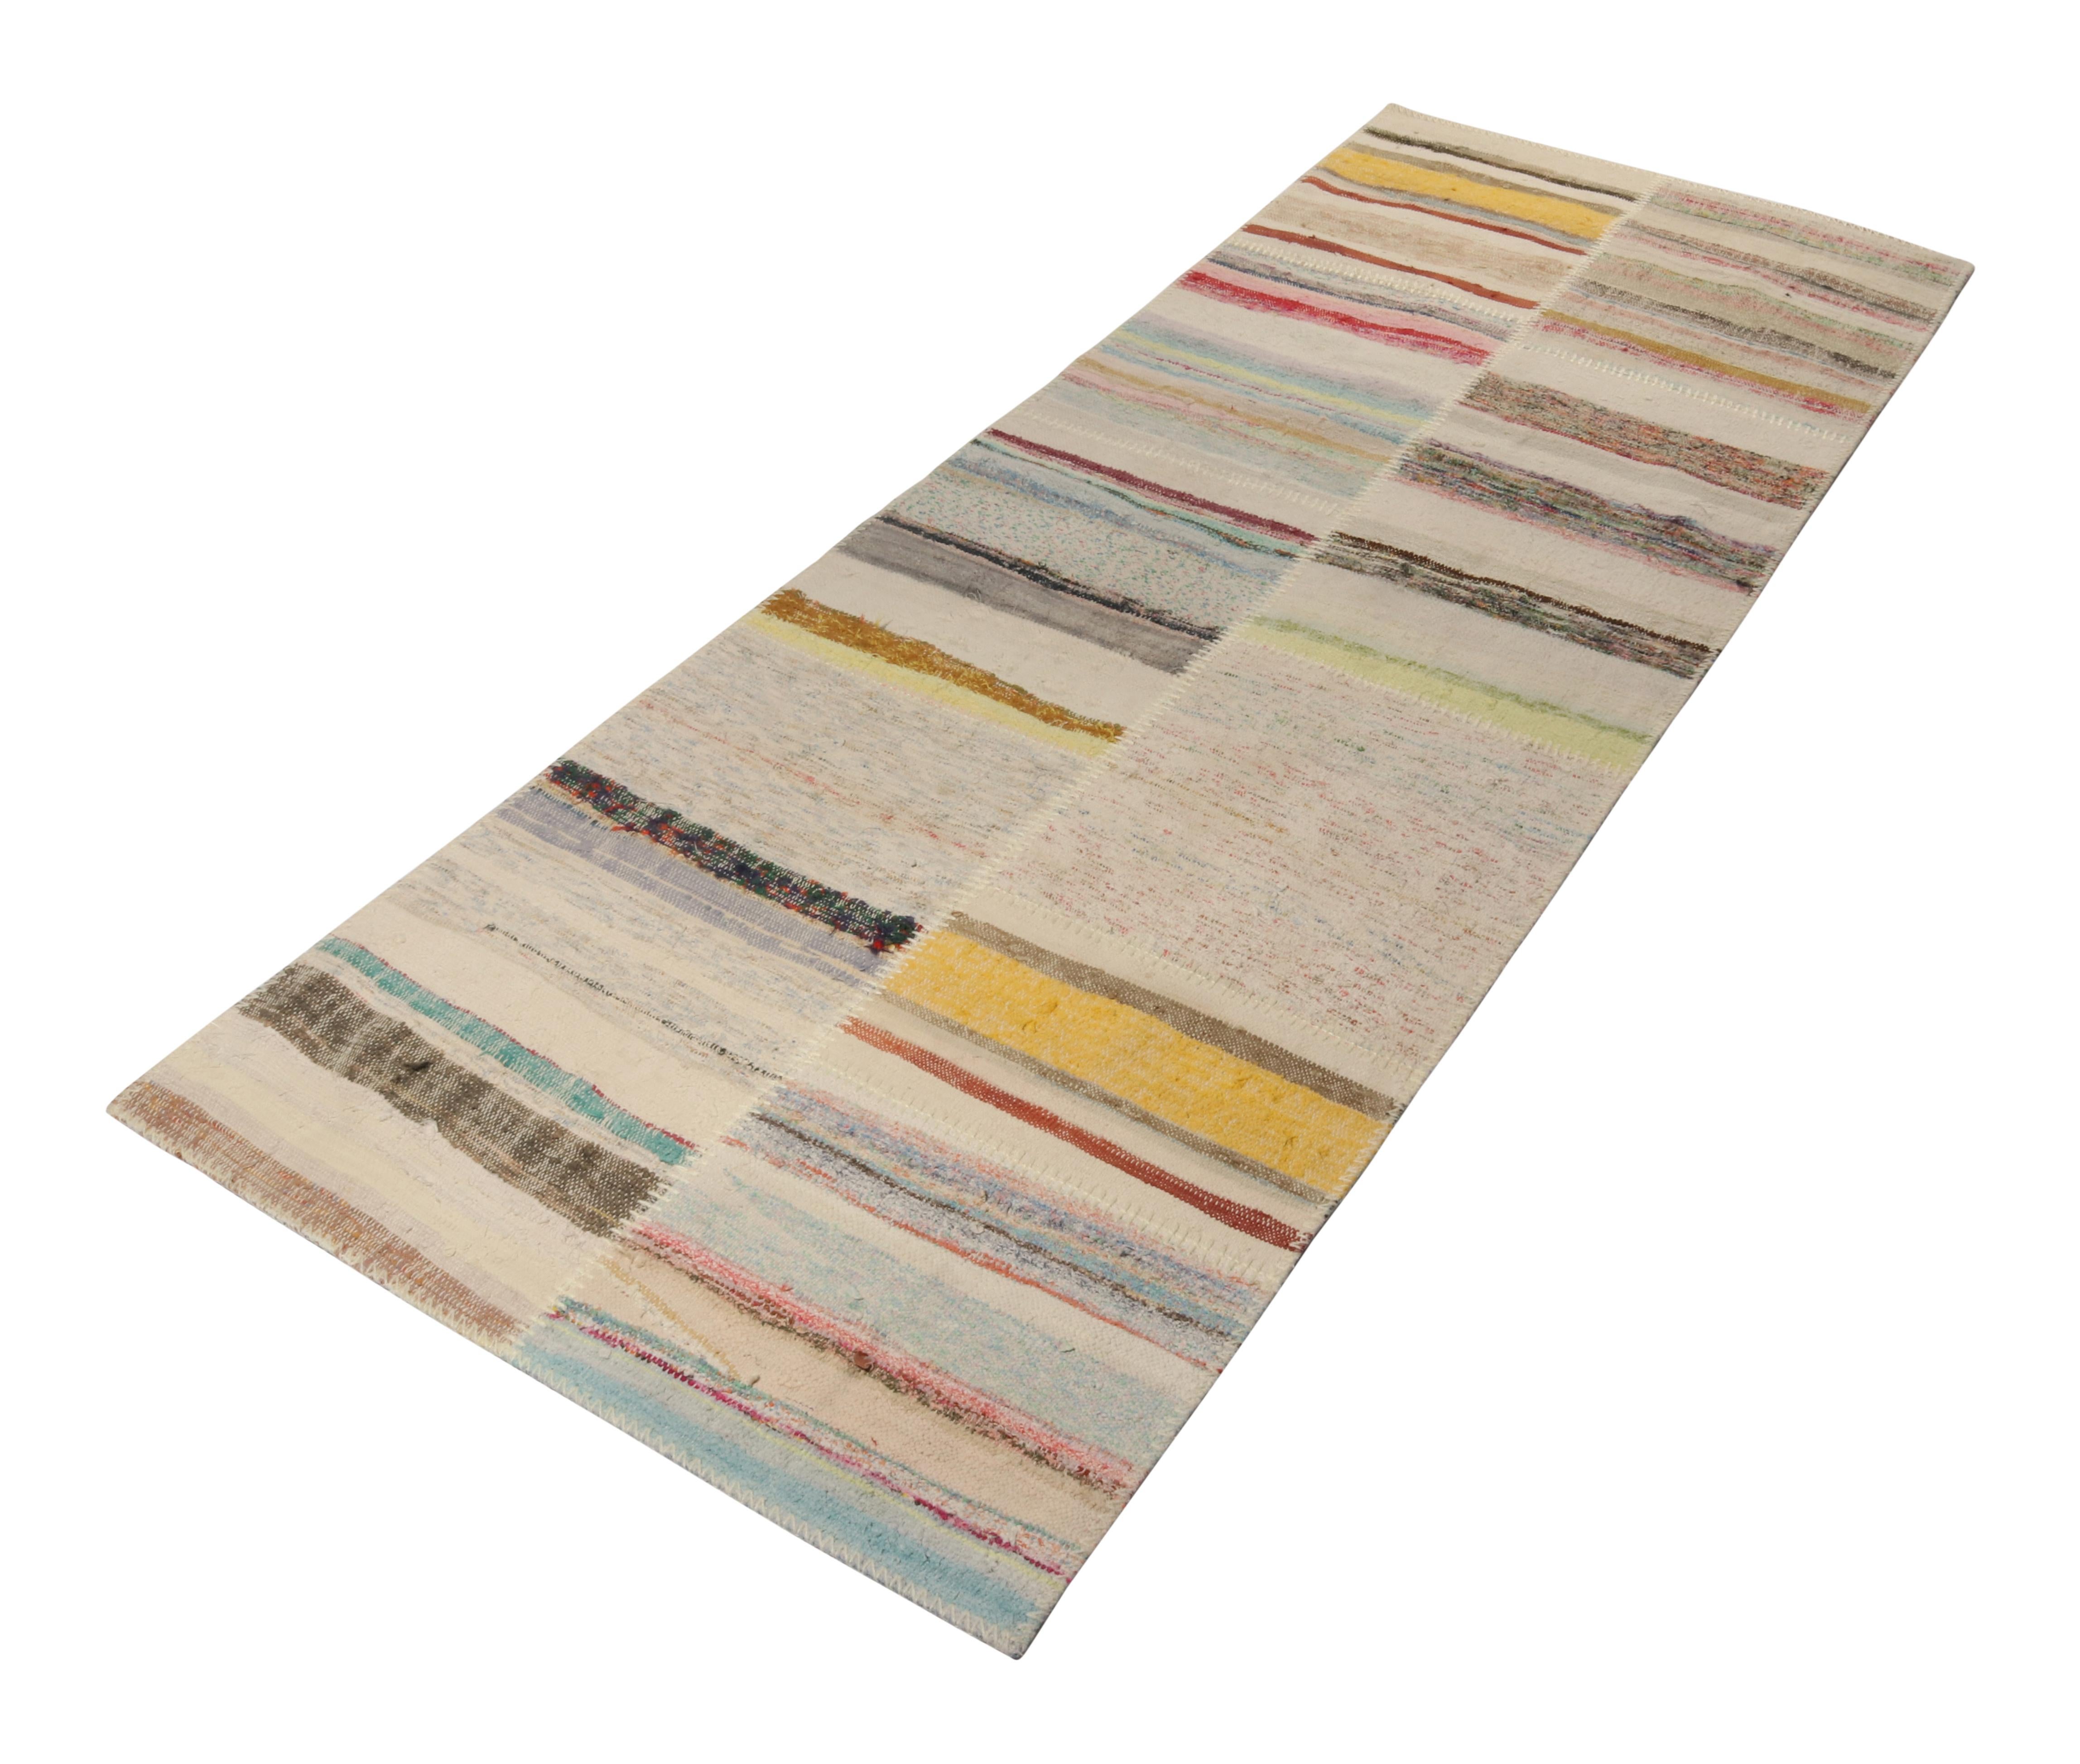 Handwoven in wool, Rug & Kilim presents a 3x8 contemporary runner from their innovative new patchwork kilim collection. 

On the Design: 

This flat weave technique repurposes vintage yarns in polychromatic stripes and striae, achieving a playful